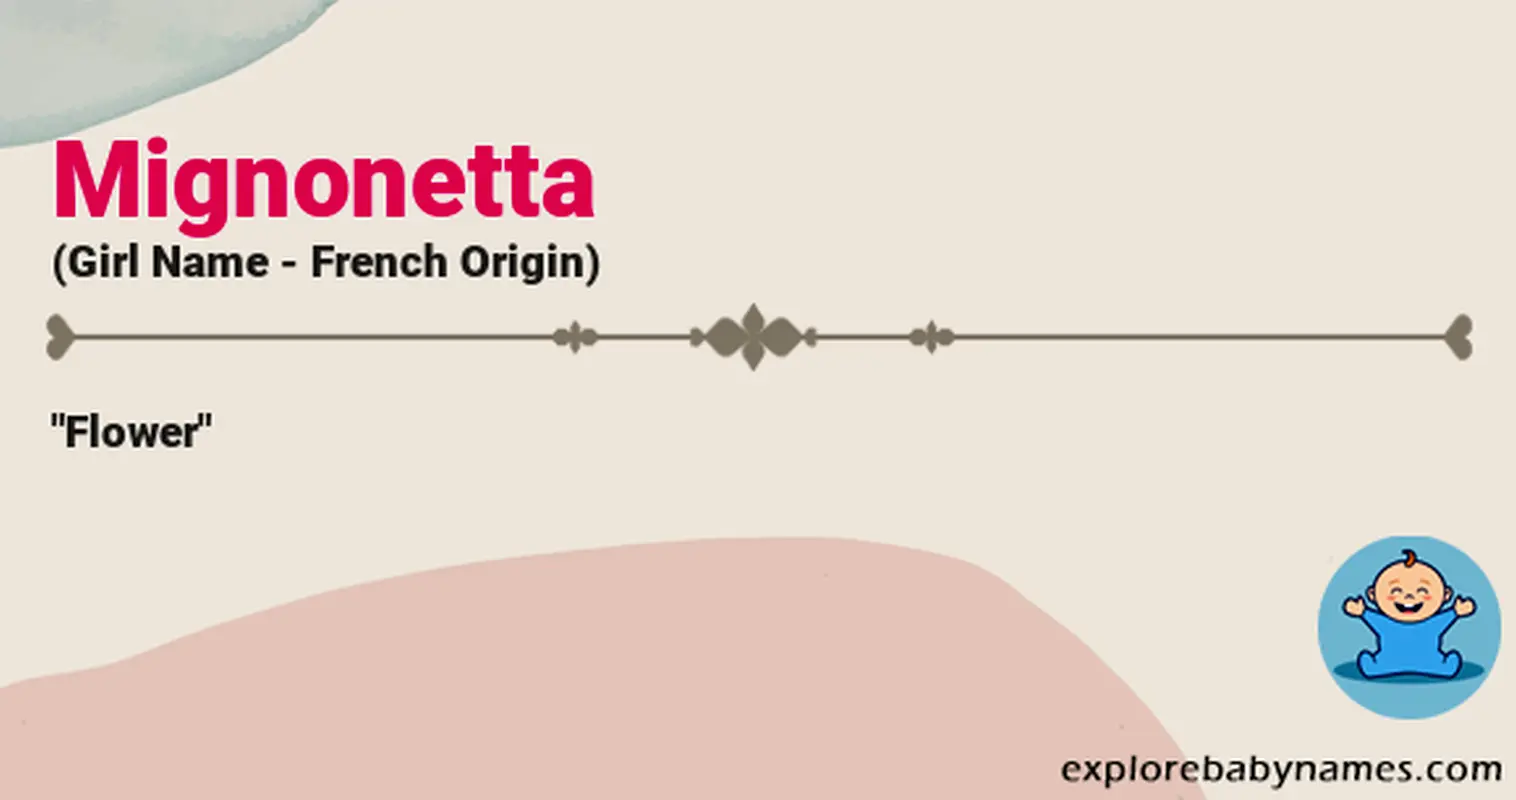 Meaning of Mignonetta